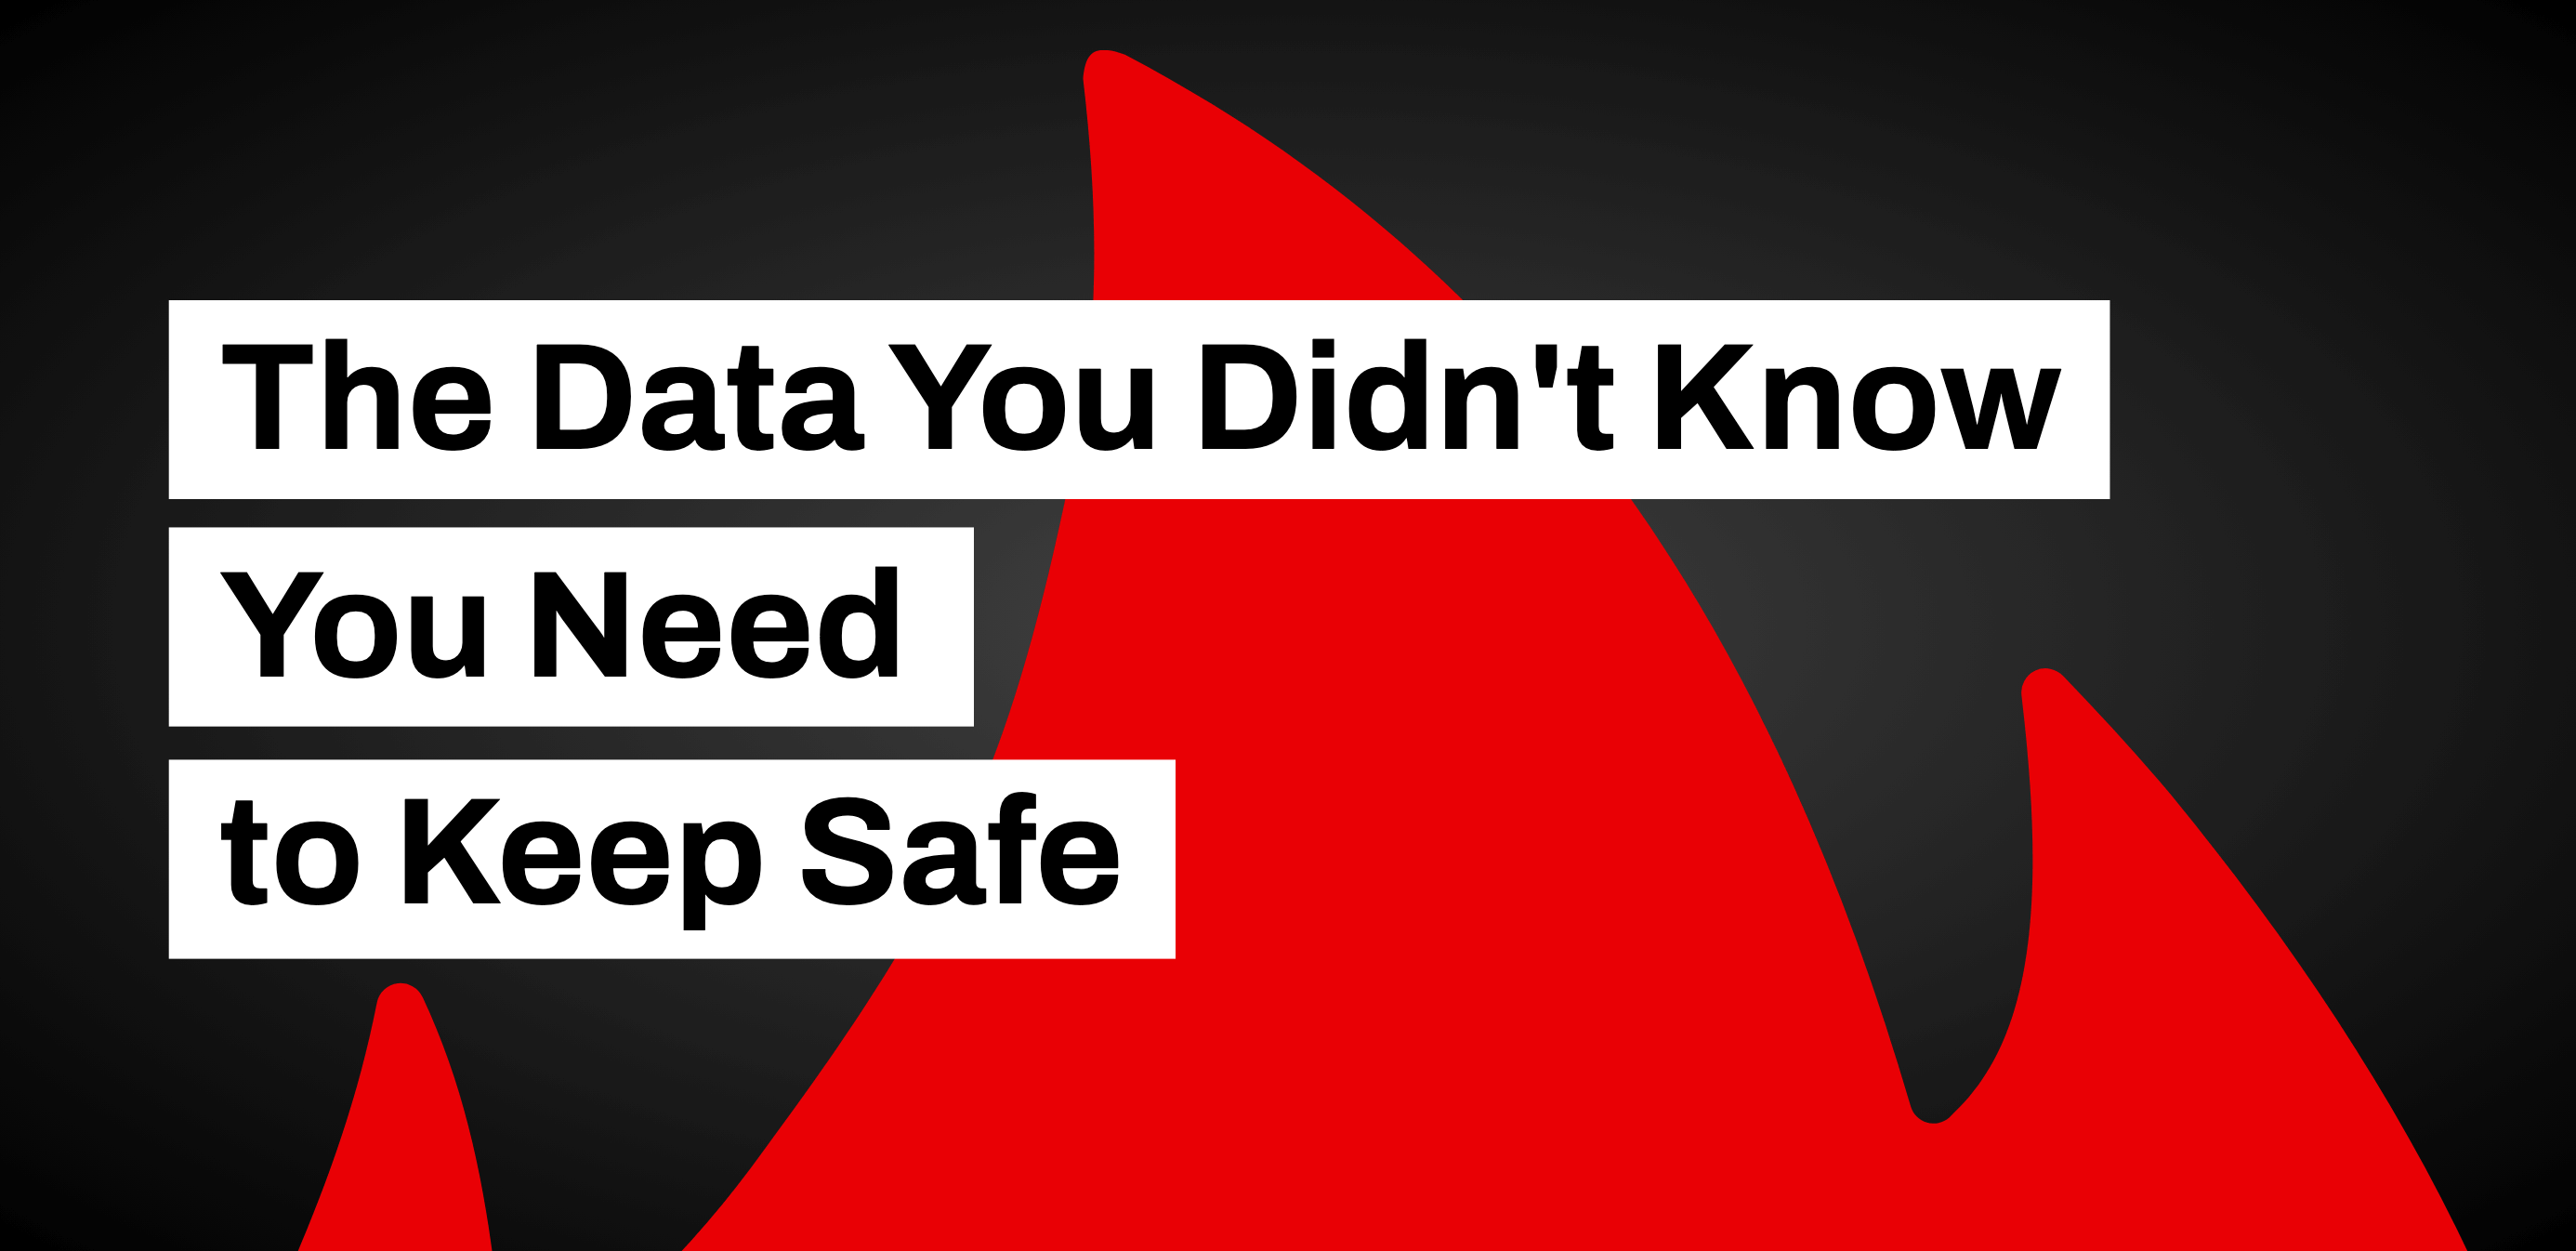 The Data You Didn't Know You Need to Keep Safe